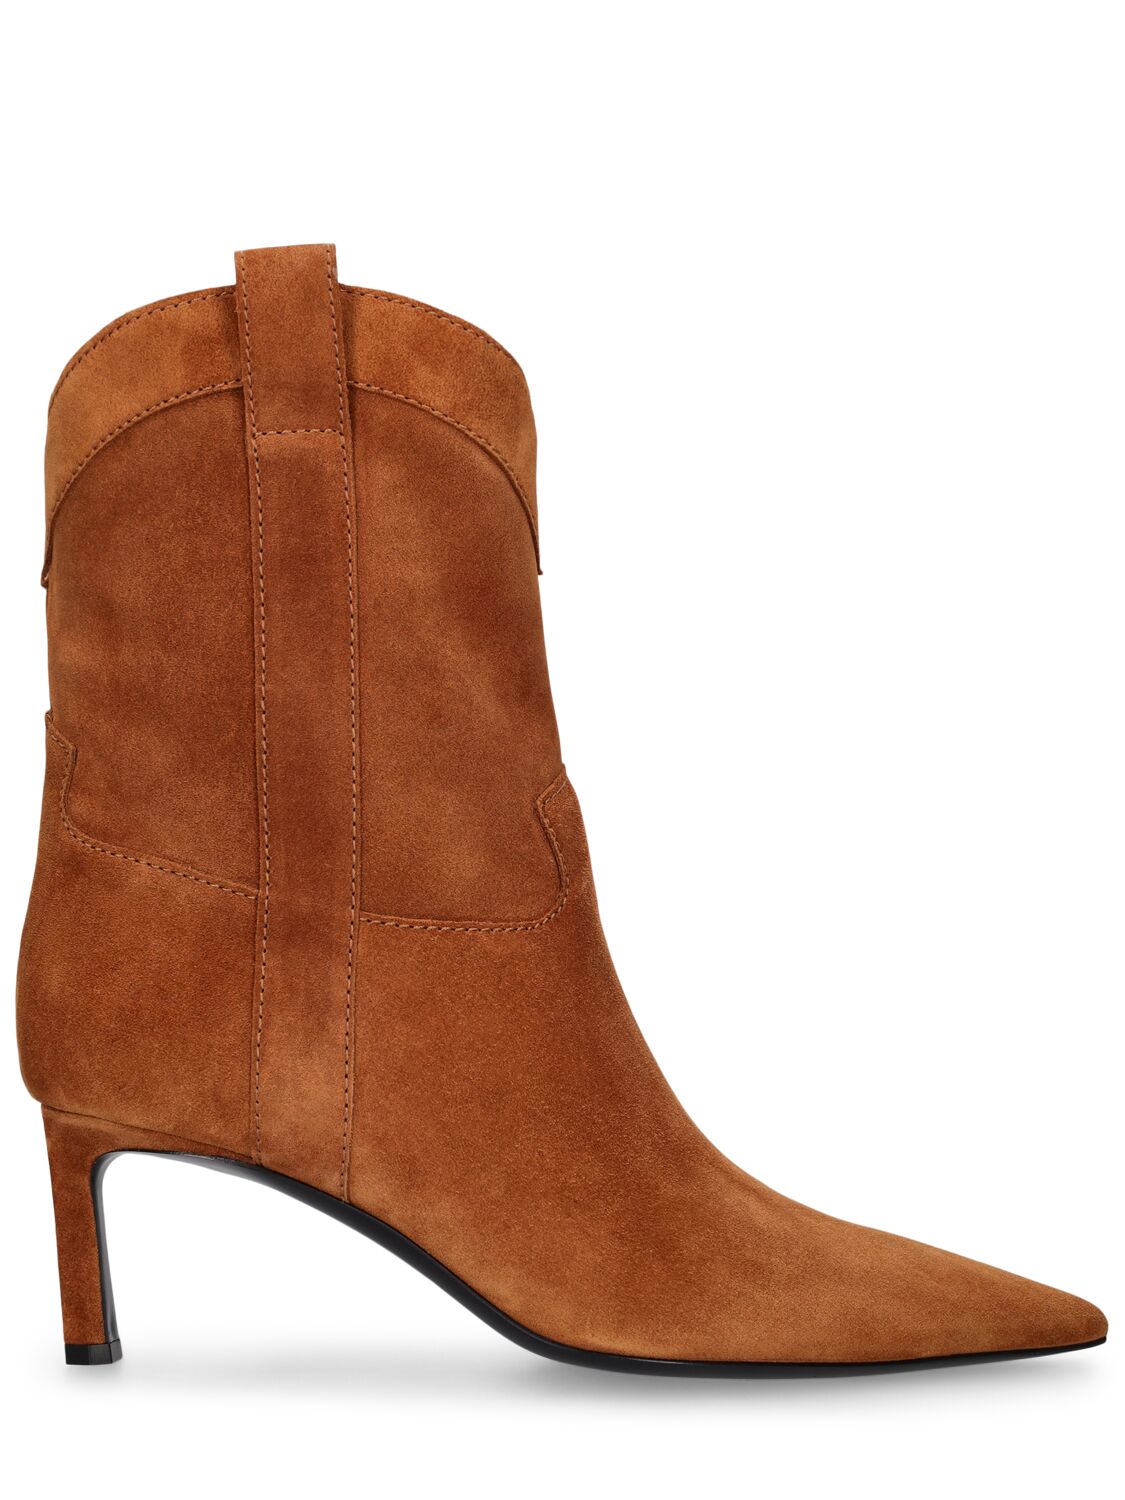 Sergio Rossi 60mm Leather Tall Boots In Tan